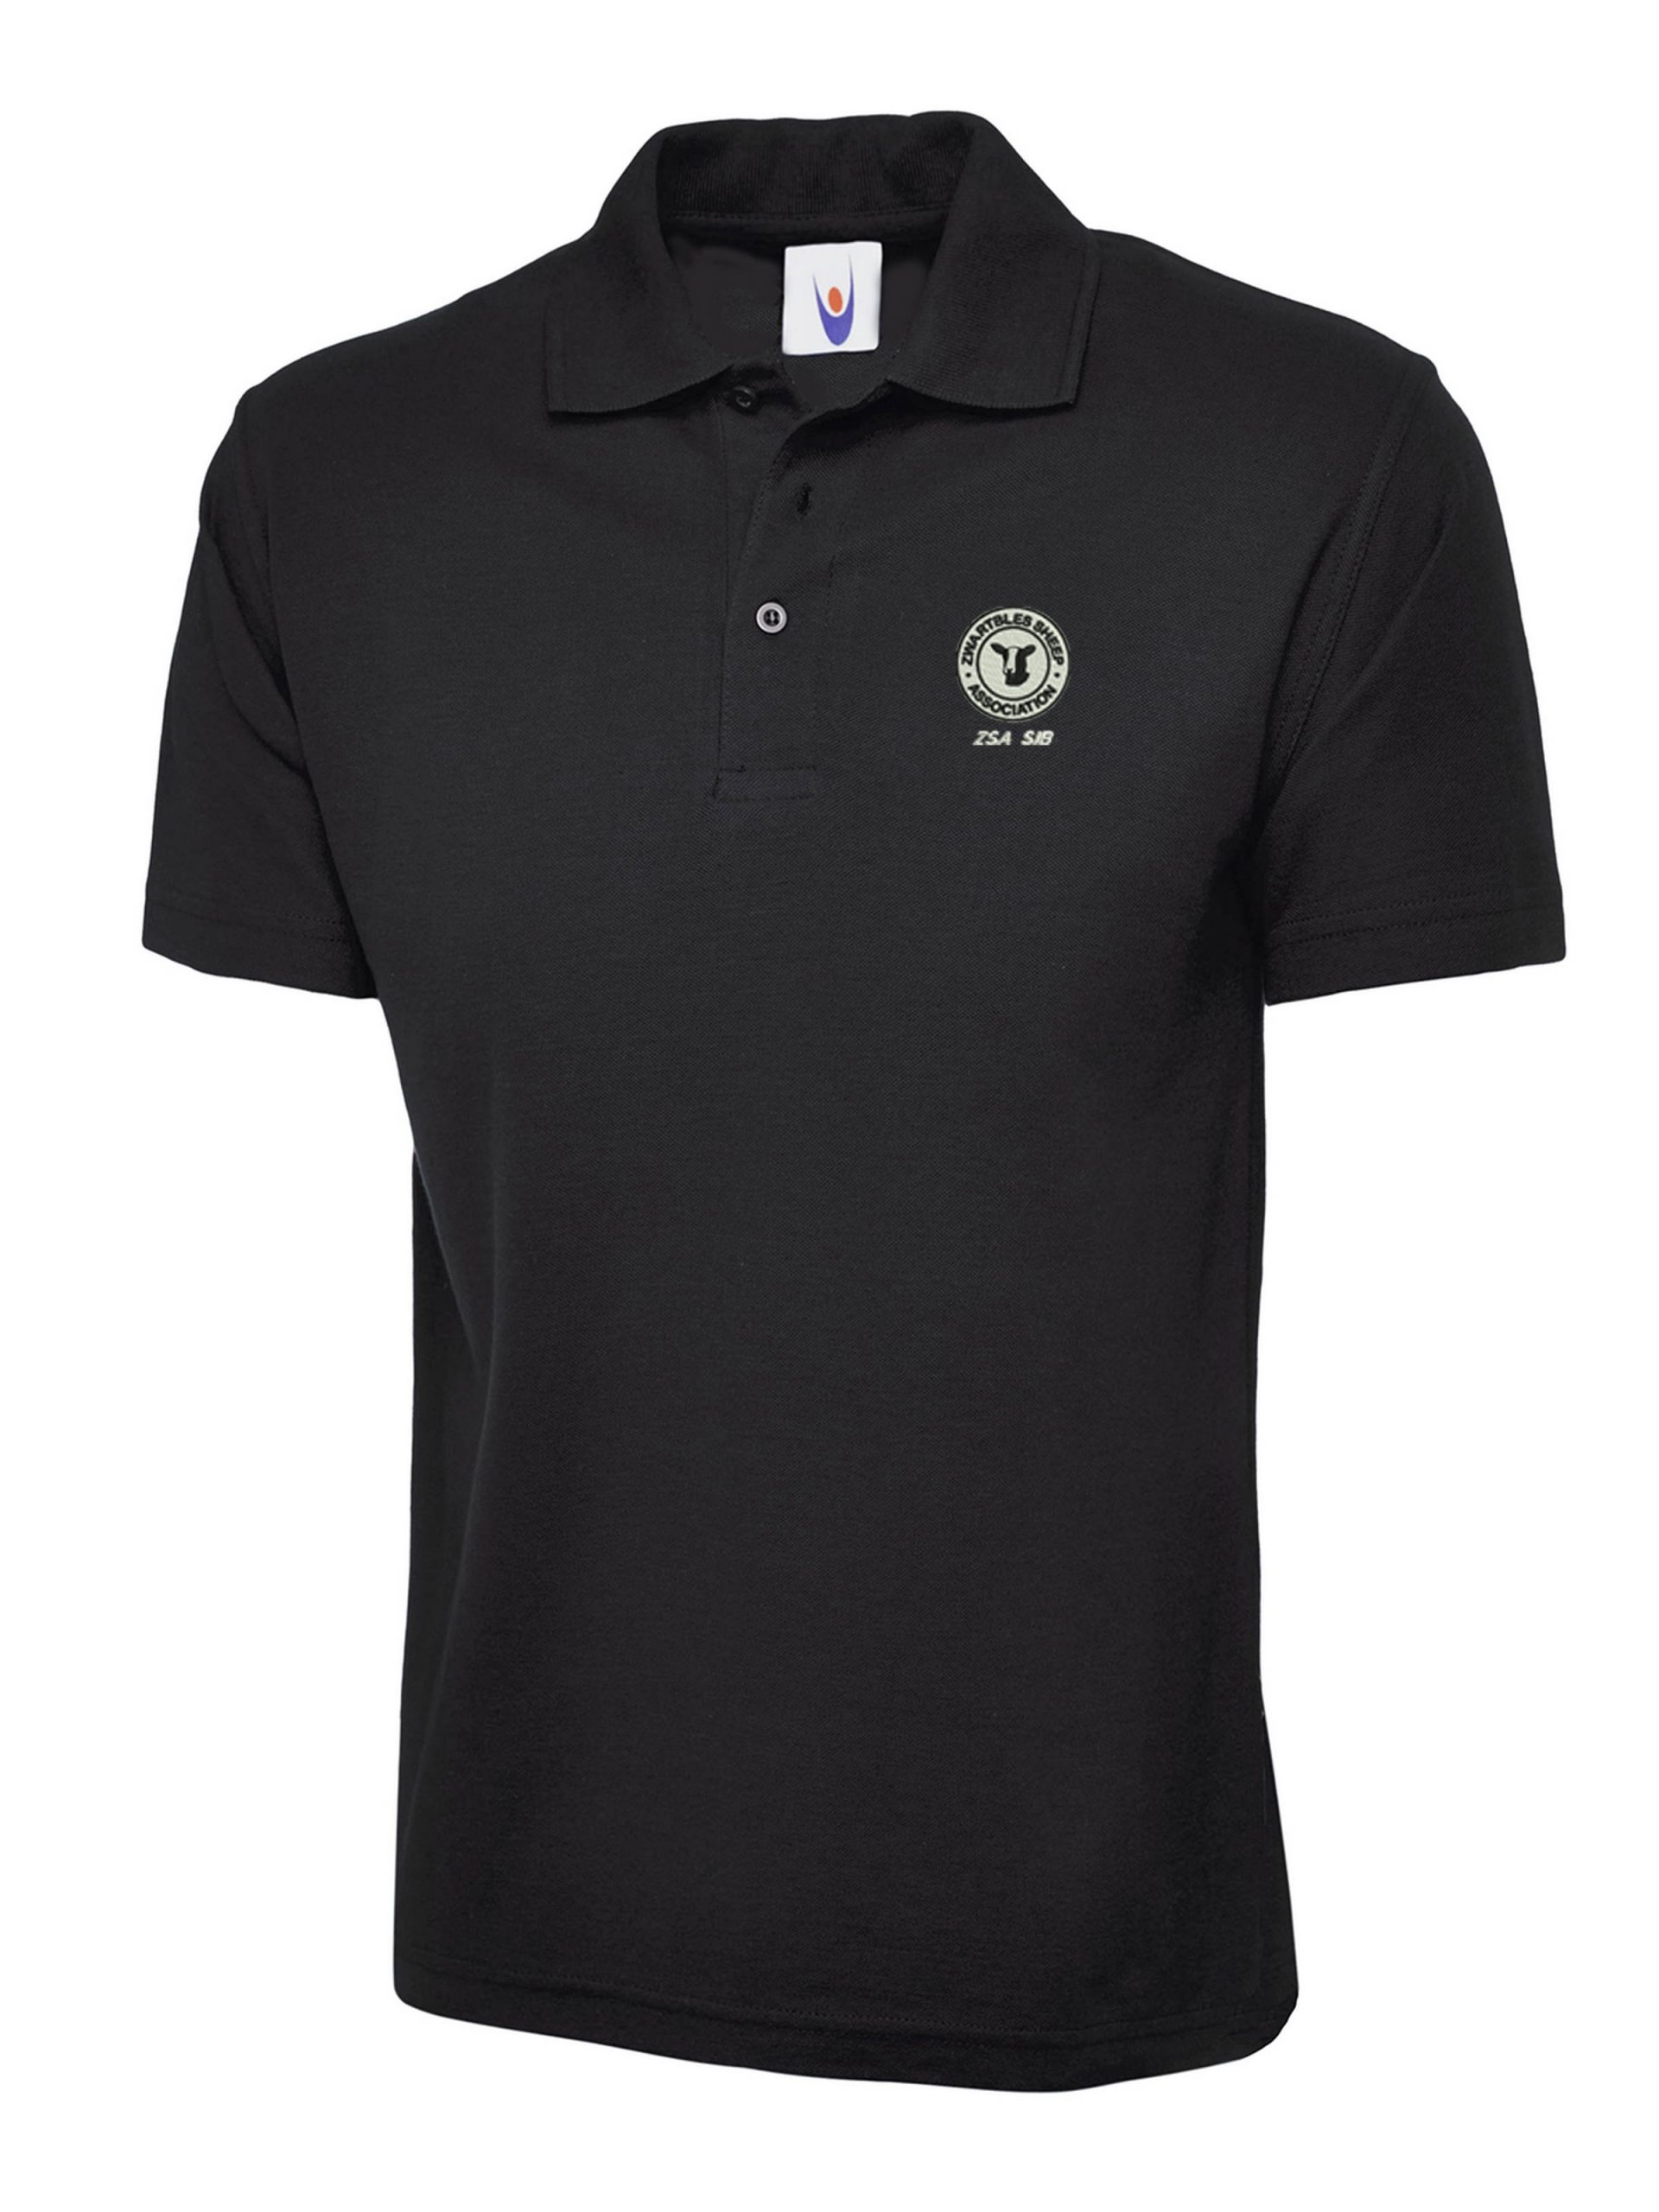 products-zsa-sir_child_polo_uc103_black-scaled